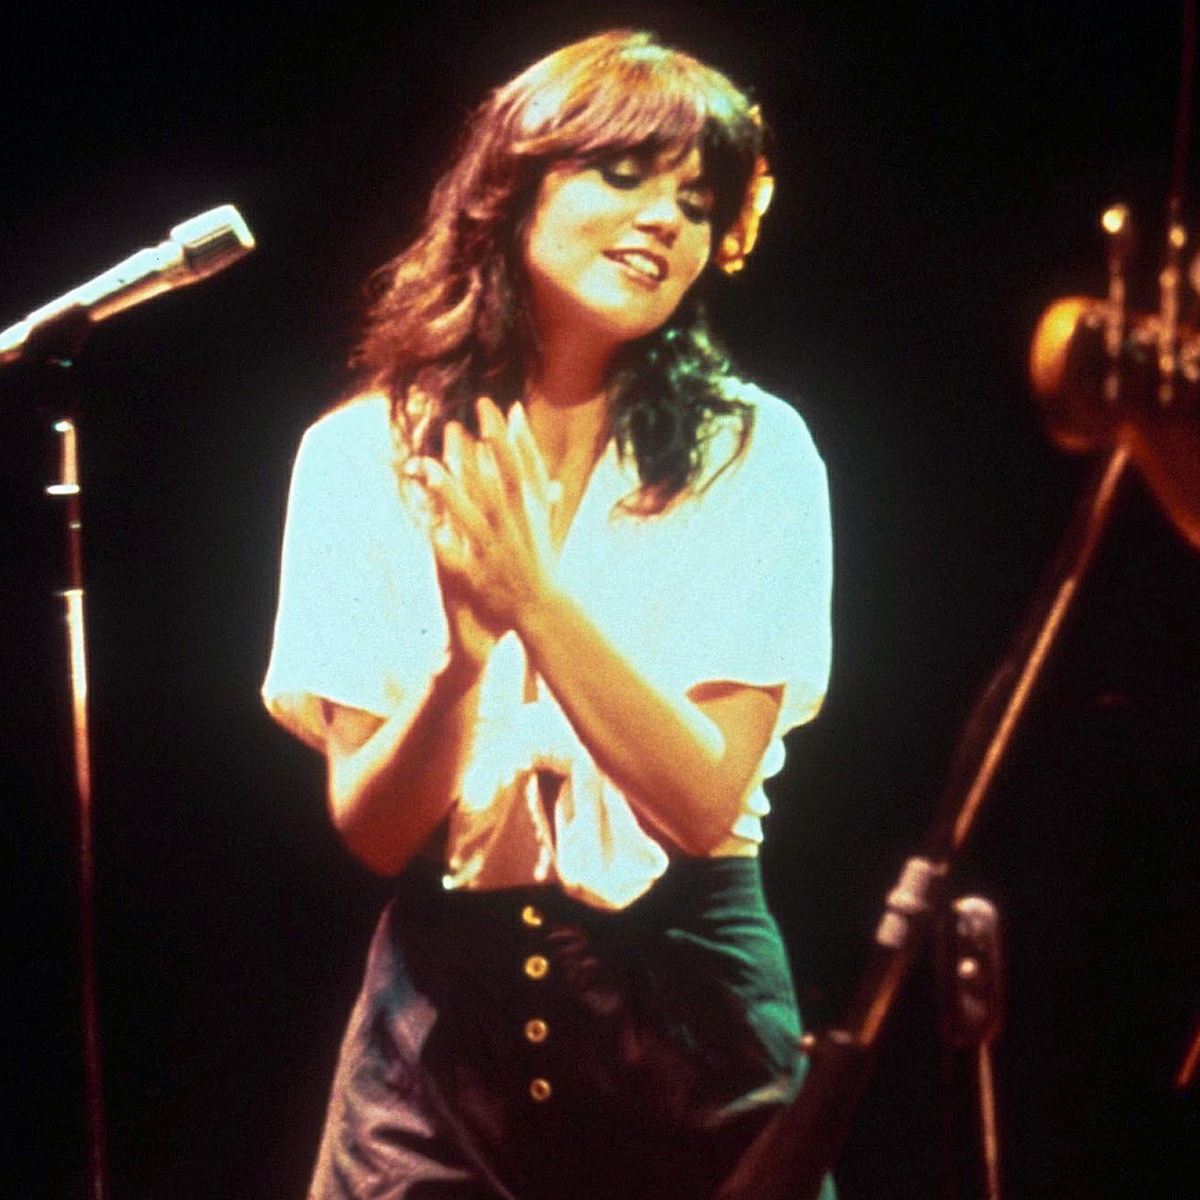 https://akns-images.eonline.com/eol_images/Entire_Site/2023030/rs_1200x1200-230130173823-1200-linda-ronstadt-shutterstock_editorial_66387b.jpg?fit=around%7C1080:540&output-quality=90&crop=1080:540;center,top